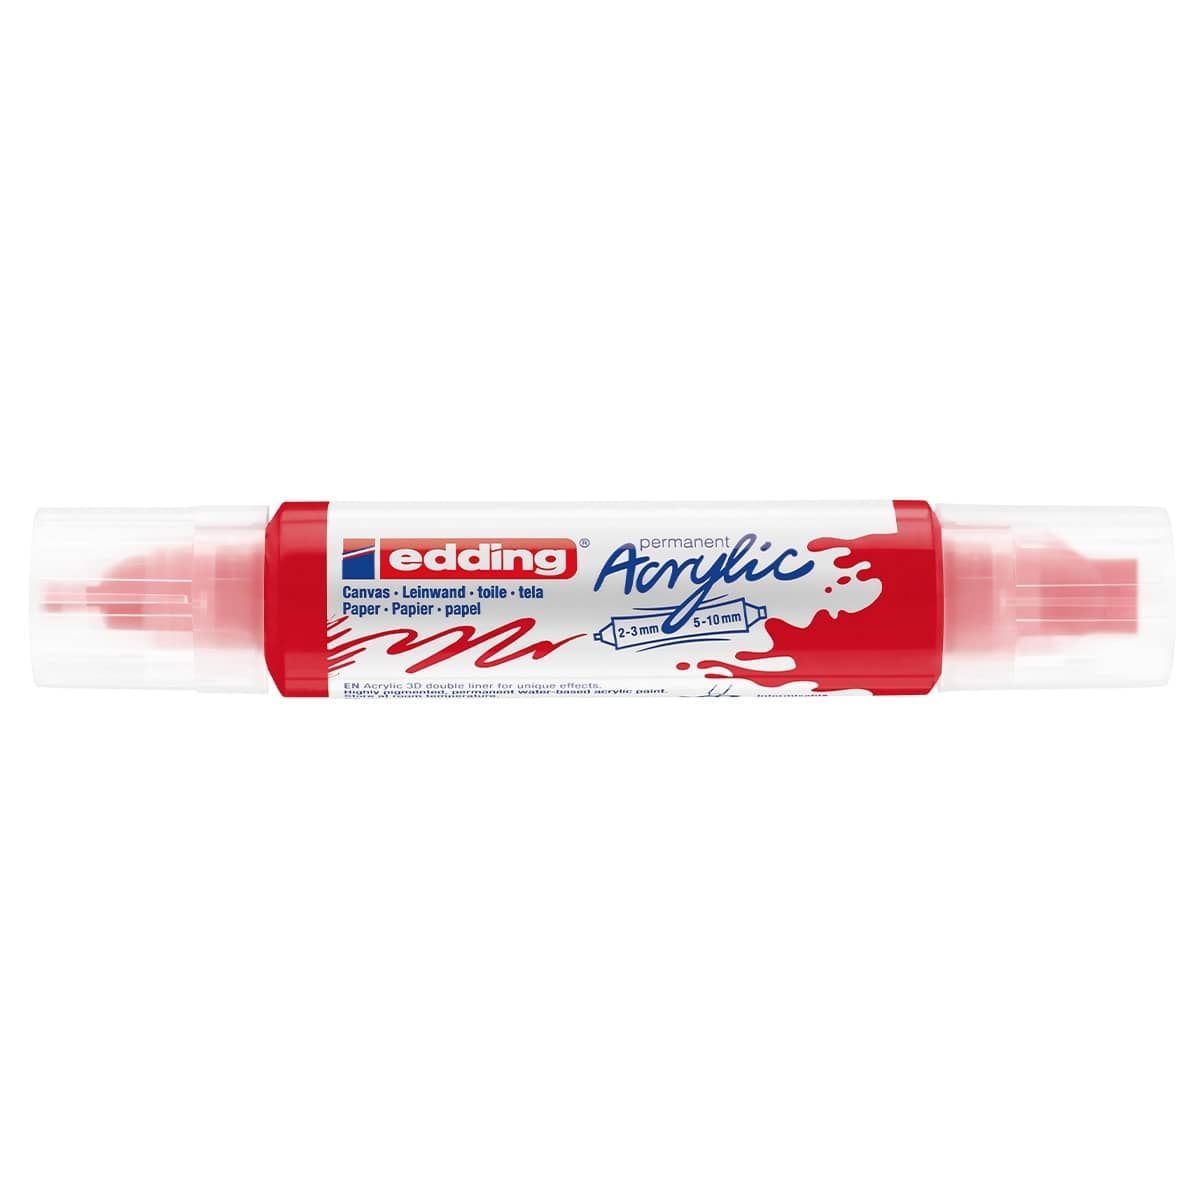 Edding 5400 Acrylic 3D Double Liner Traffic Red